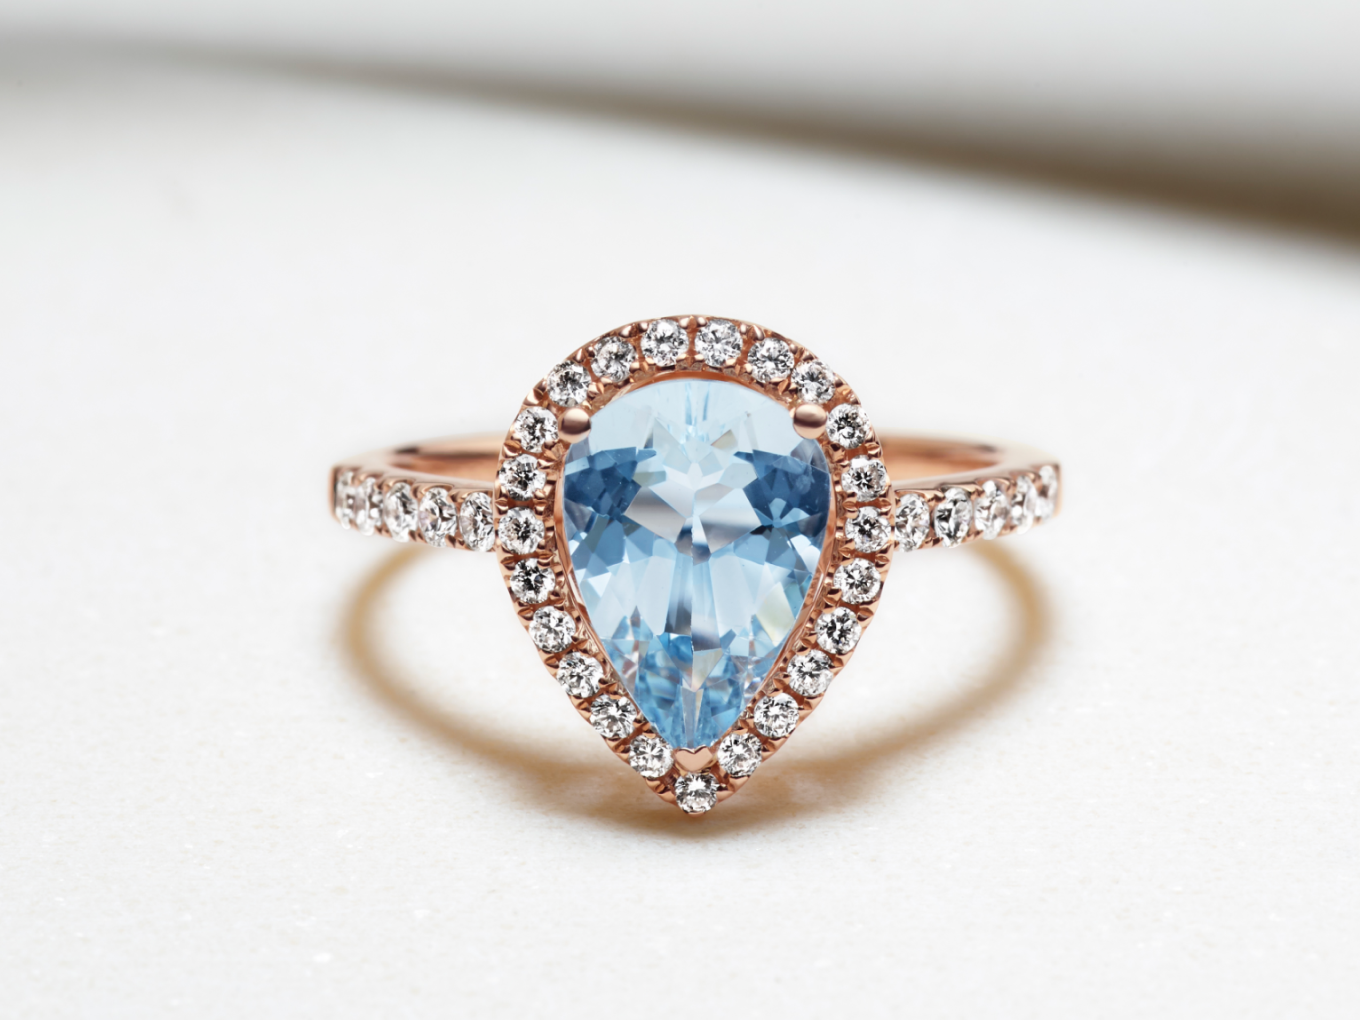 rose gold ring with pear shaped aquamarine center stone, pave band, and halo setting